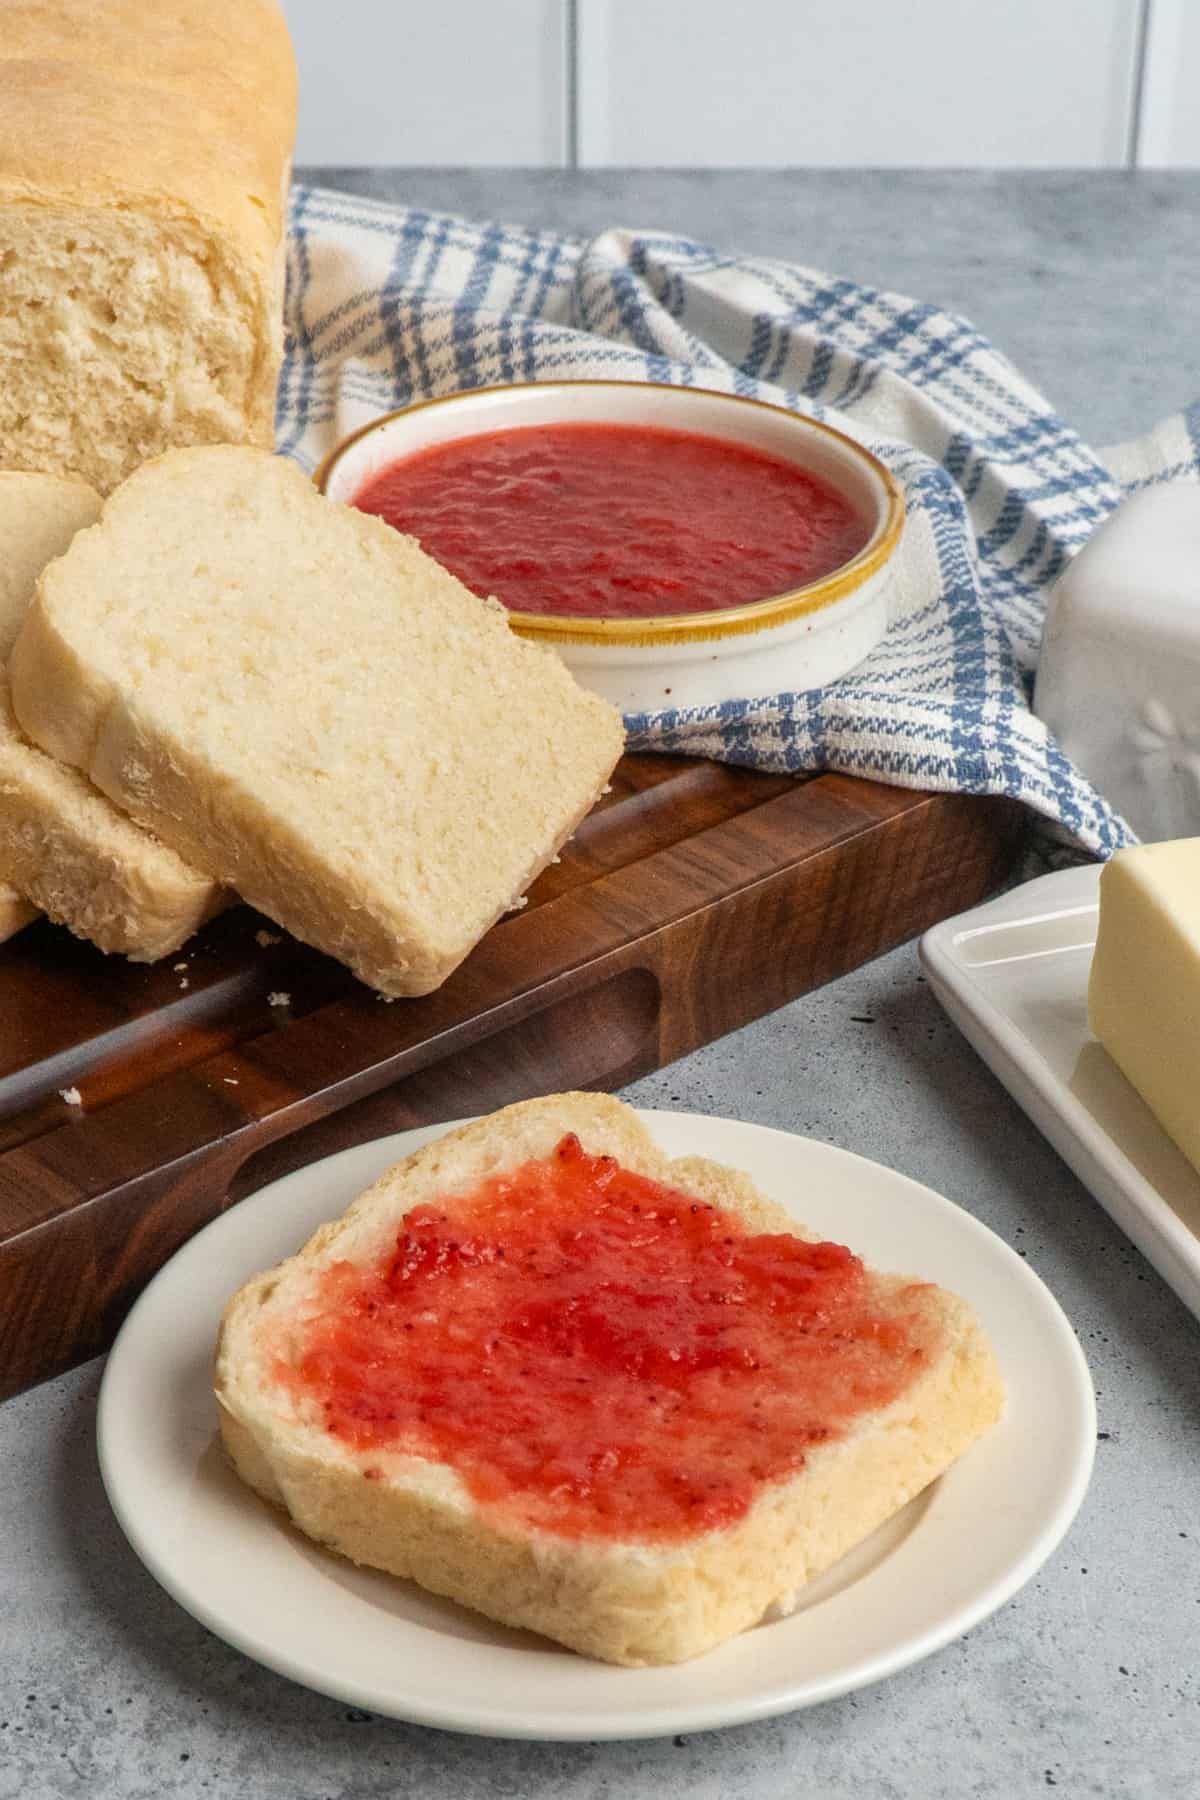 Sandwich bread on a plate with jam on it.